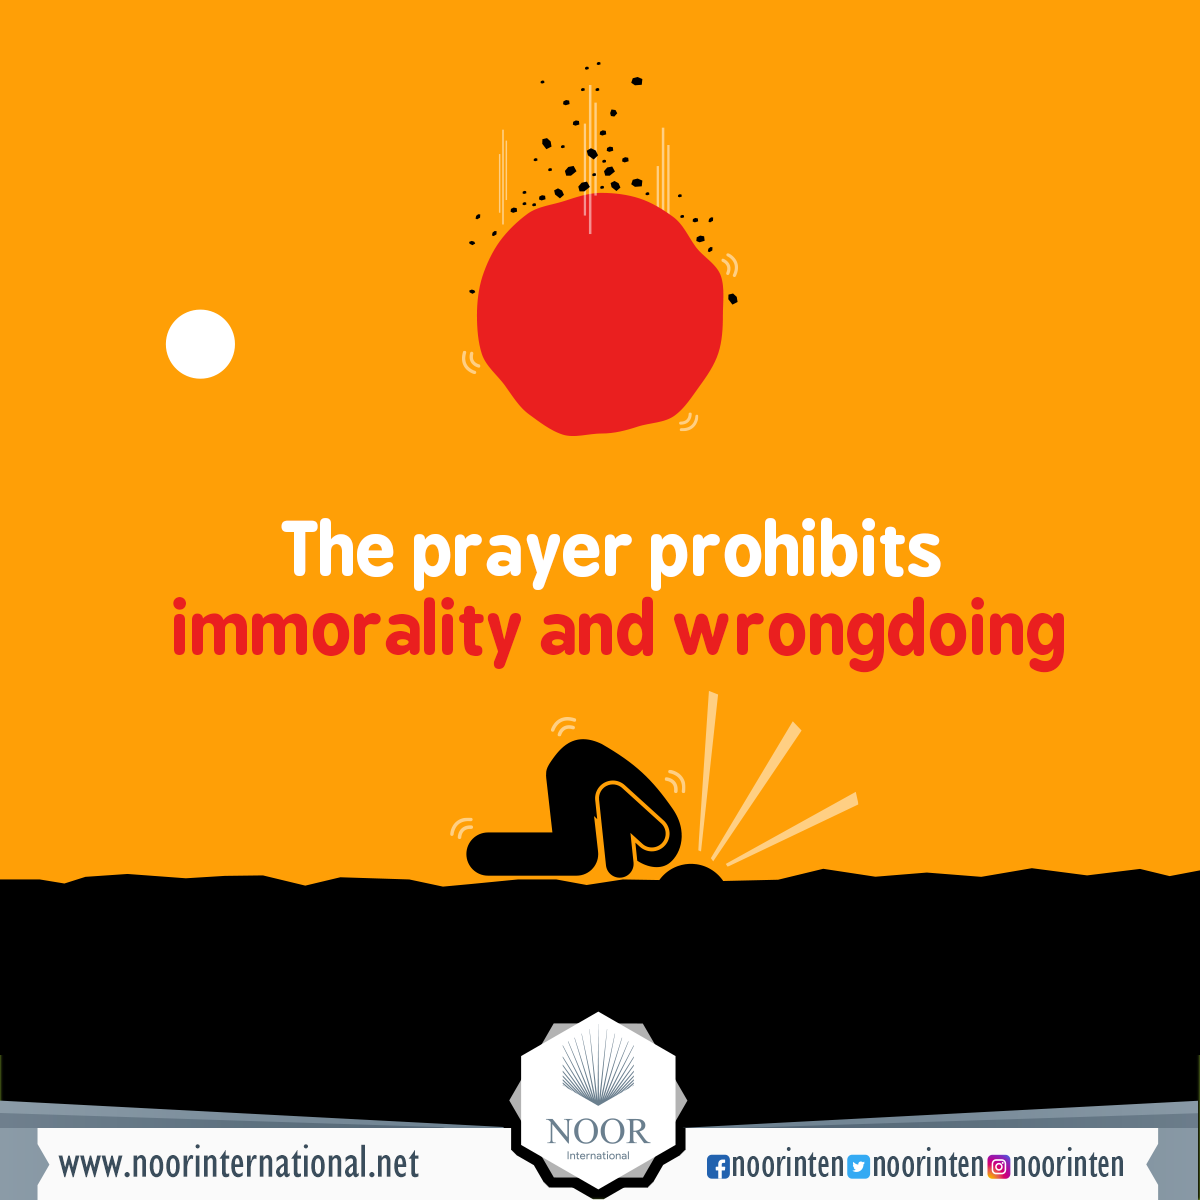 The prayer prohibits immorality and wrongdoing